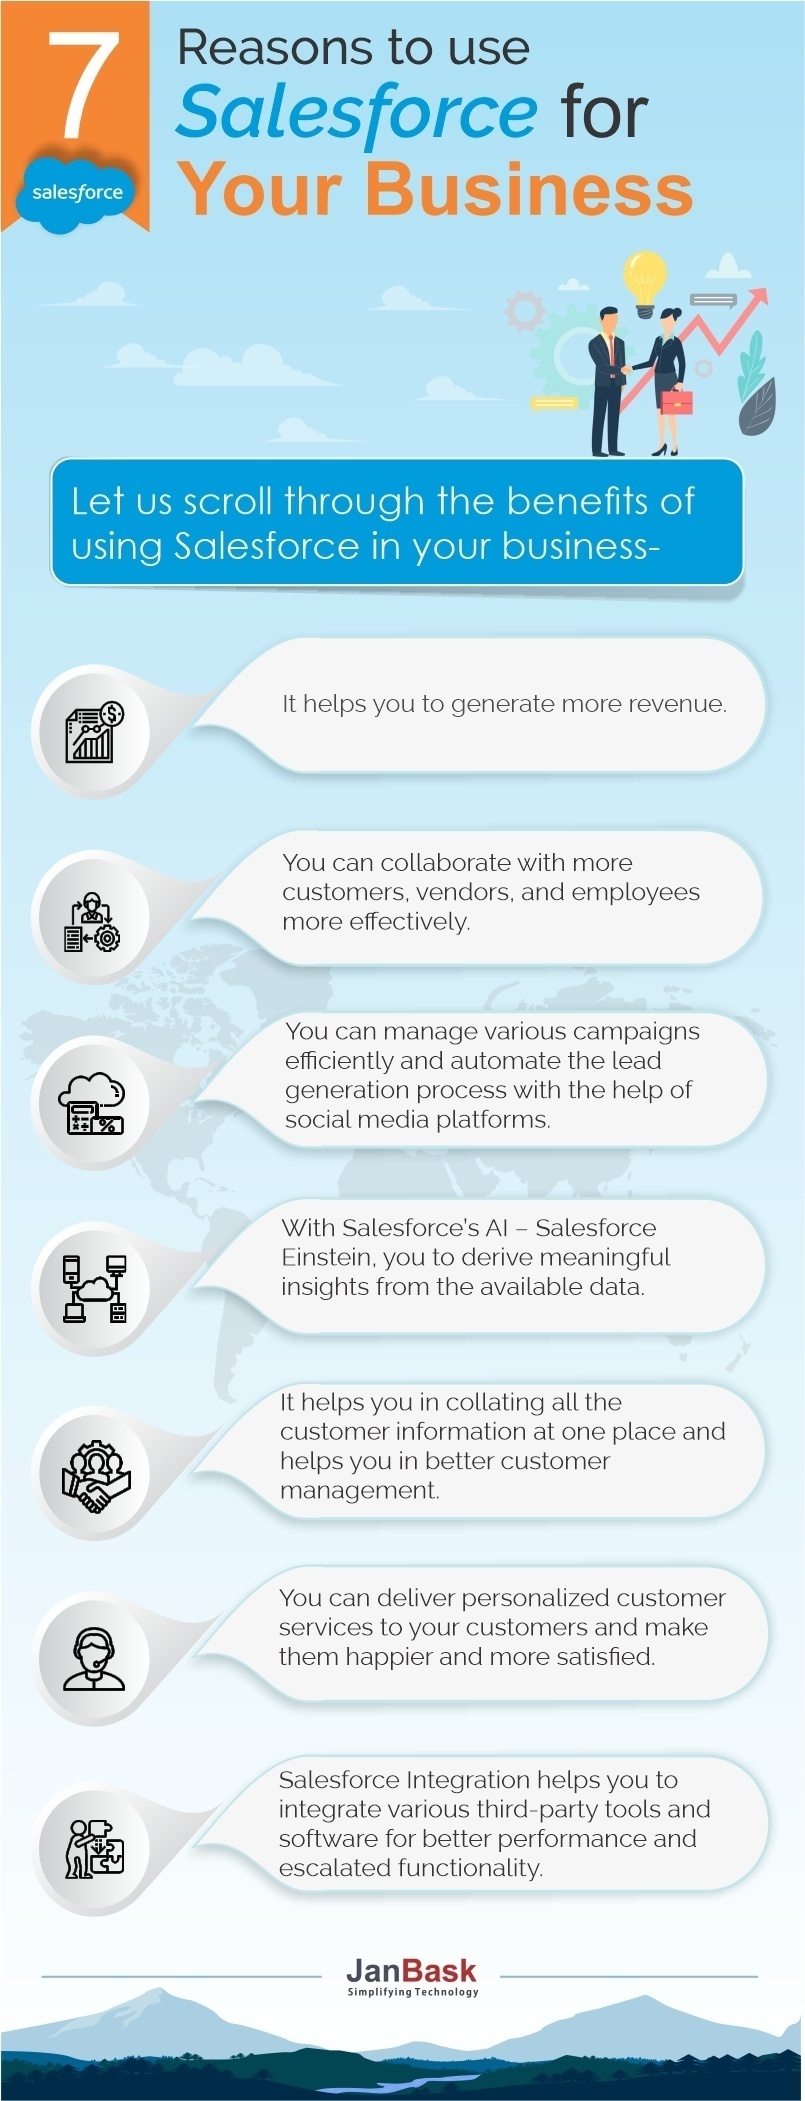 7 Reasons To Use Salesforce For Your Business - Infographic